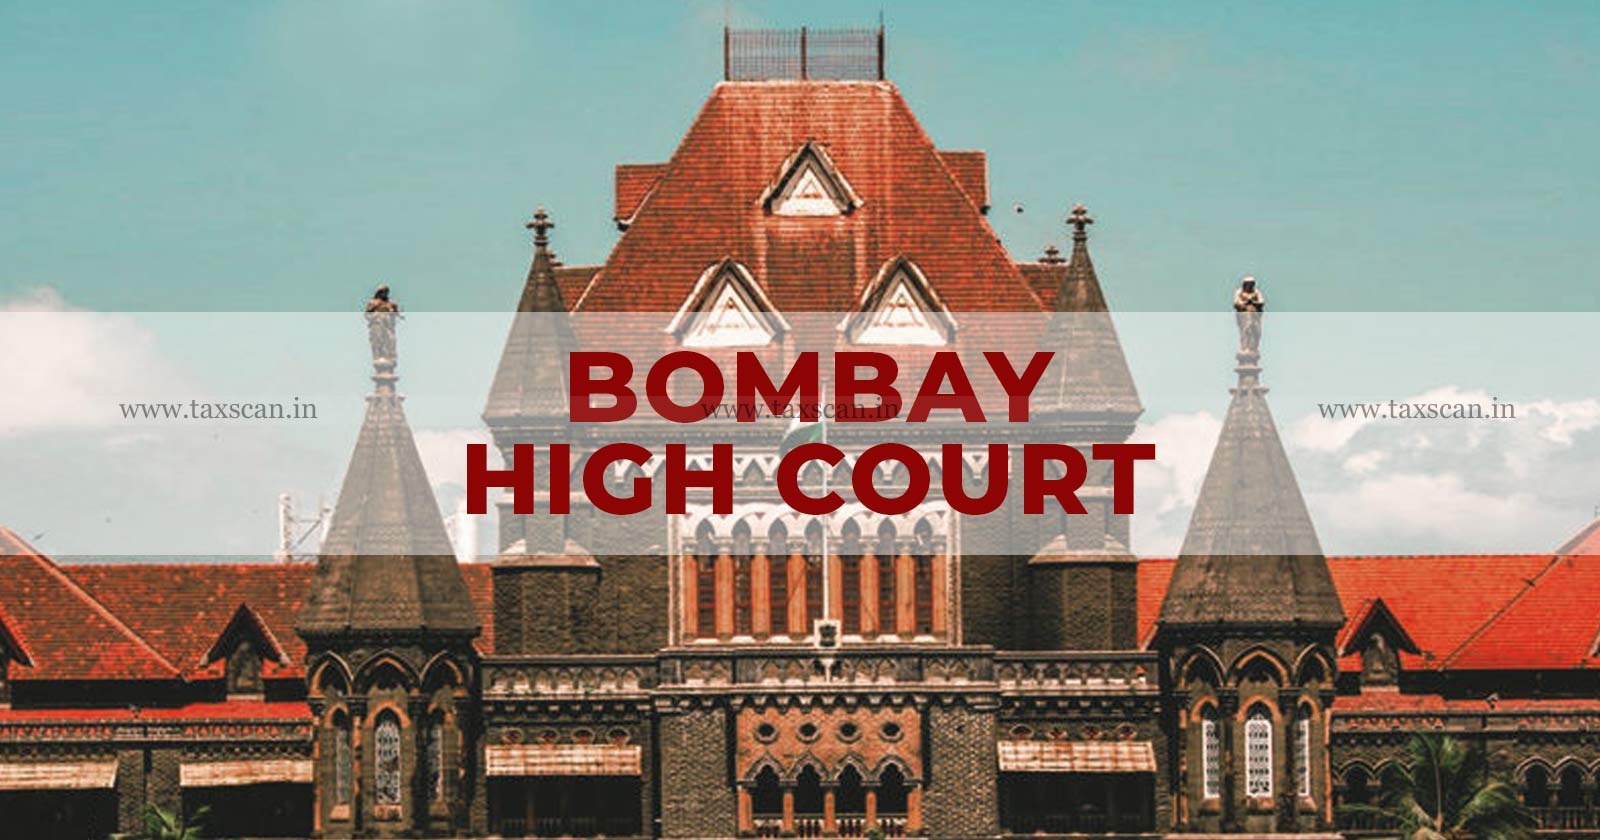 State-Tax-Officer-jurisdiction-Issue-Communication-GST-Act-Bombay-HC-Writ-Petition-STO-Communication-TAXSCAN